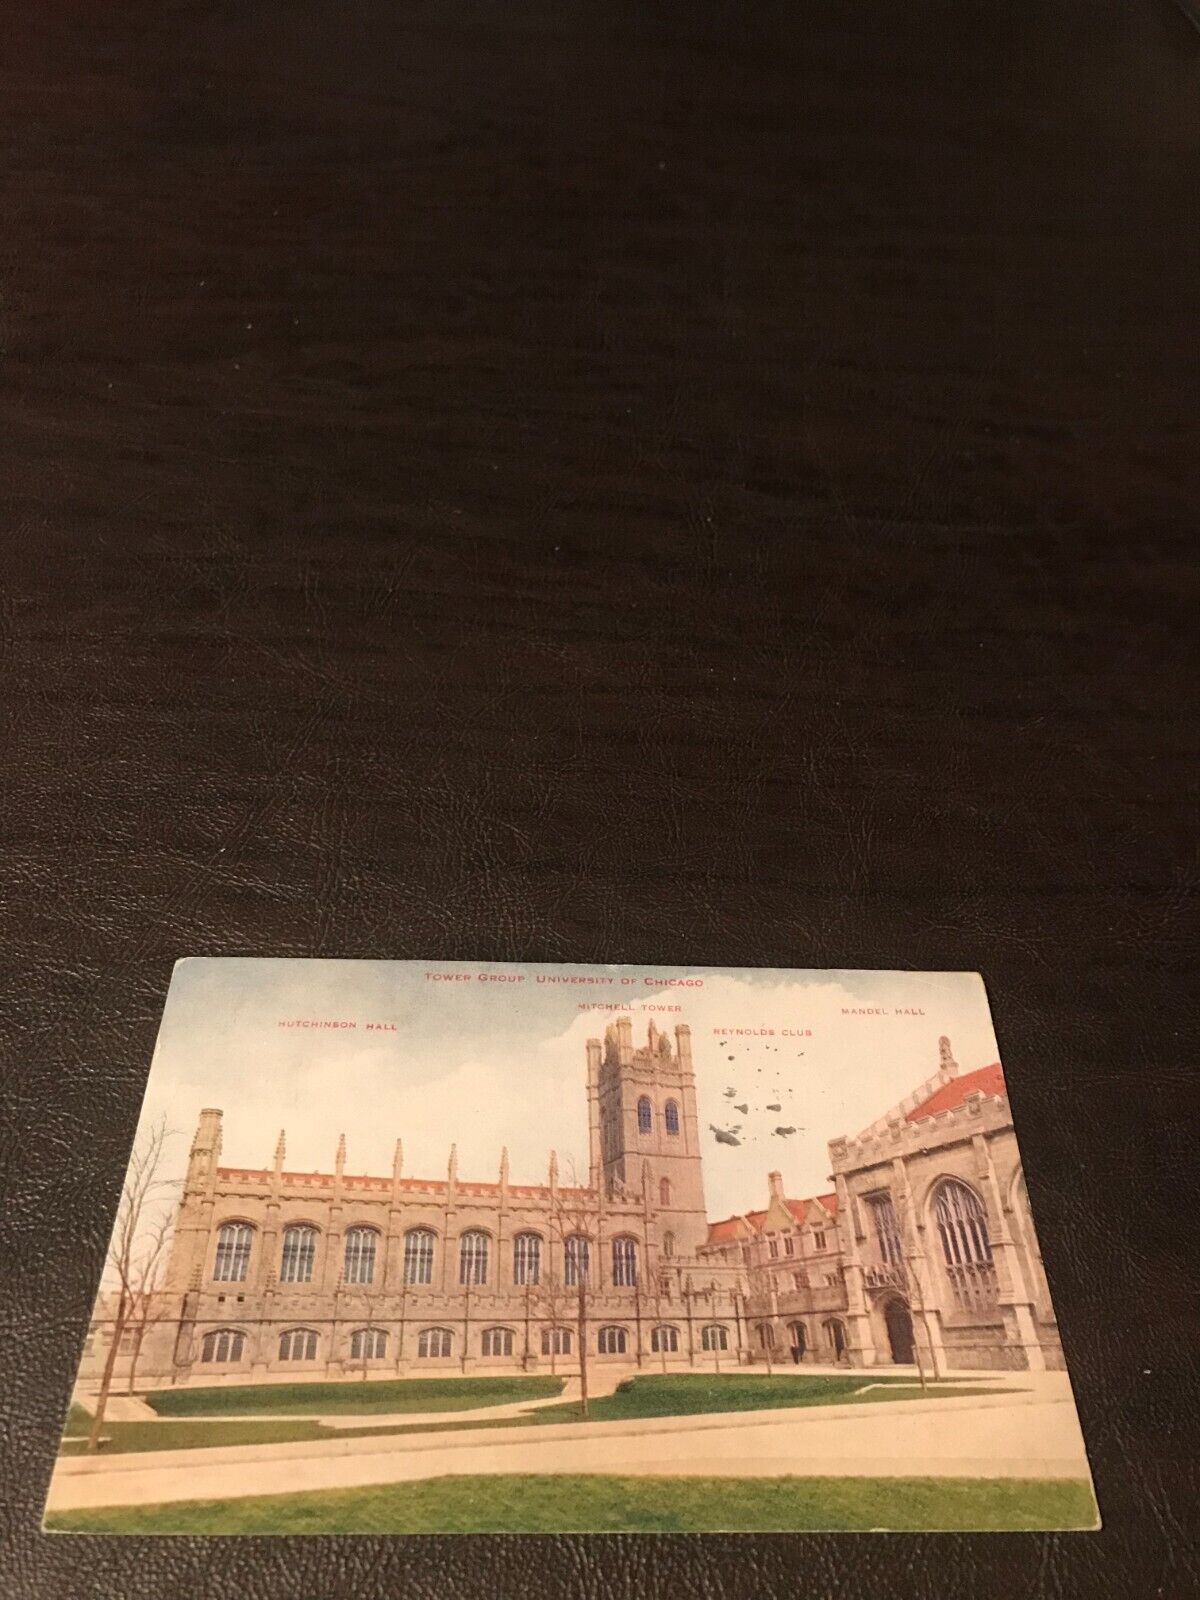 TOWER GROUP - UNIVERSITY OF CHICAGO - POSTED POSTCARD - 19??